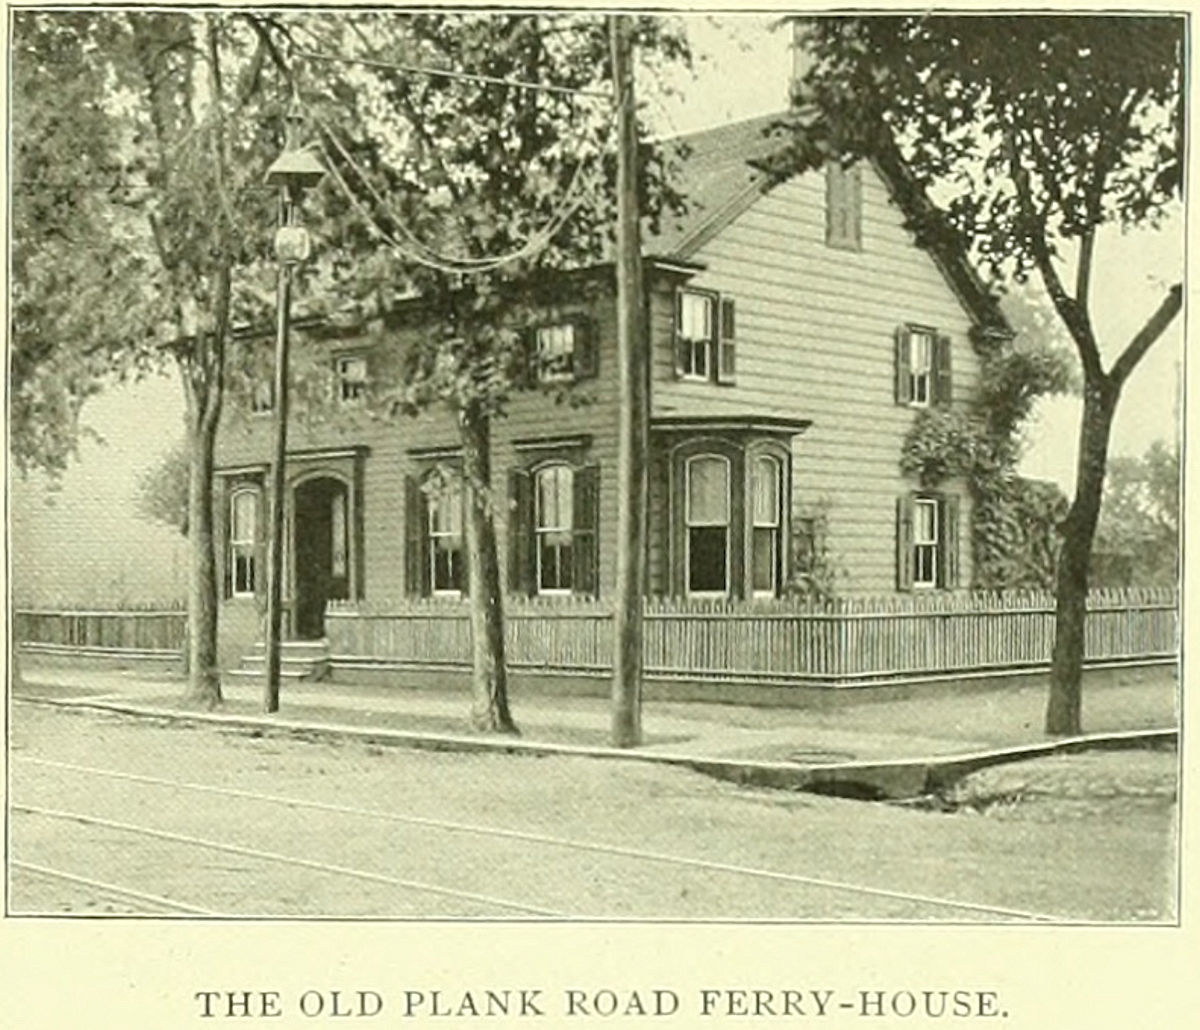 Plank Road Ferry House
Photo from Essex County Illustrated 1897
